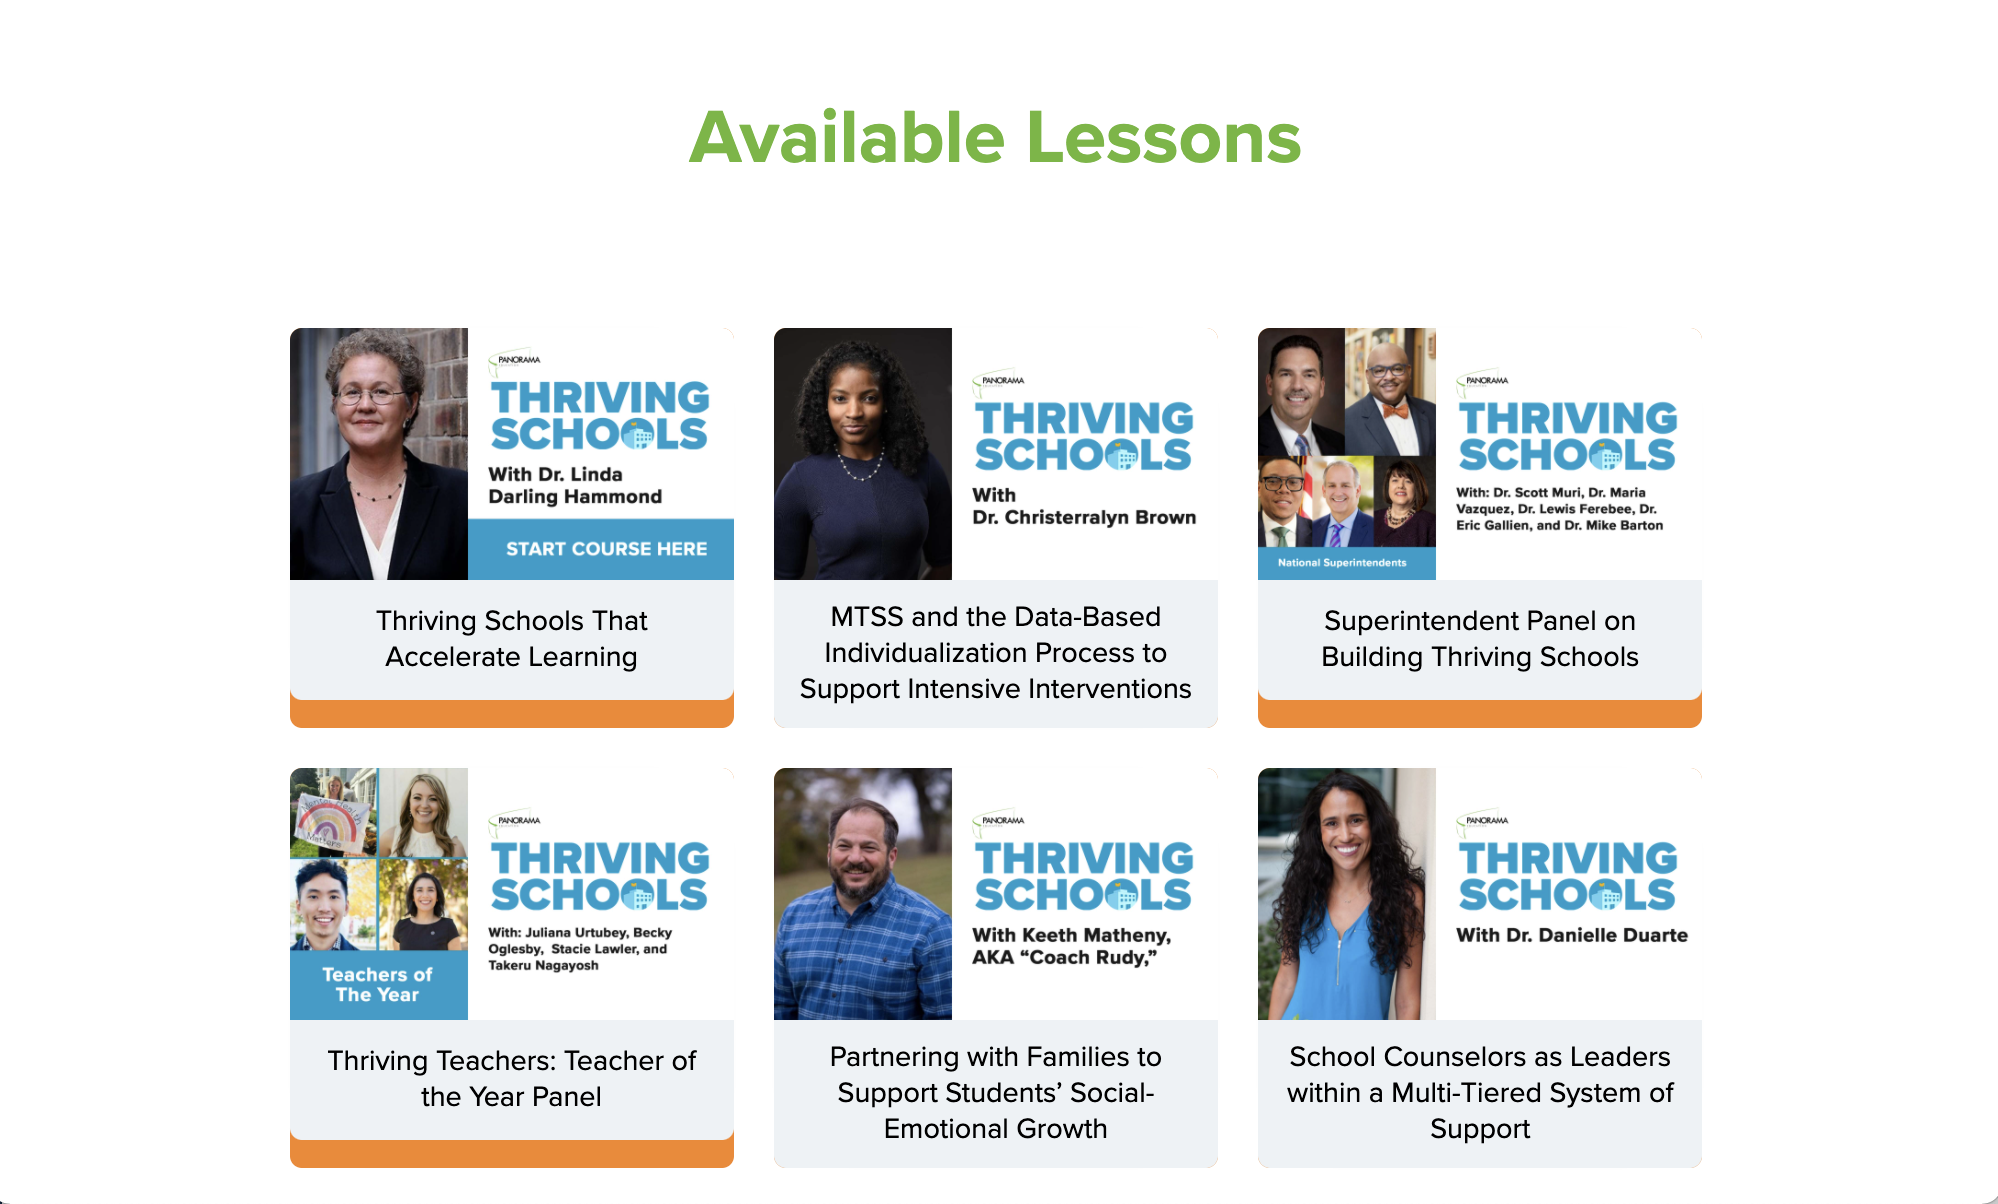 Available Lessons - The Thriving Schools Virtual Summit Experience